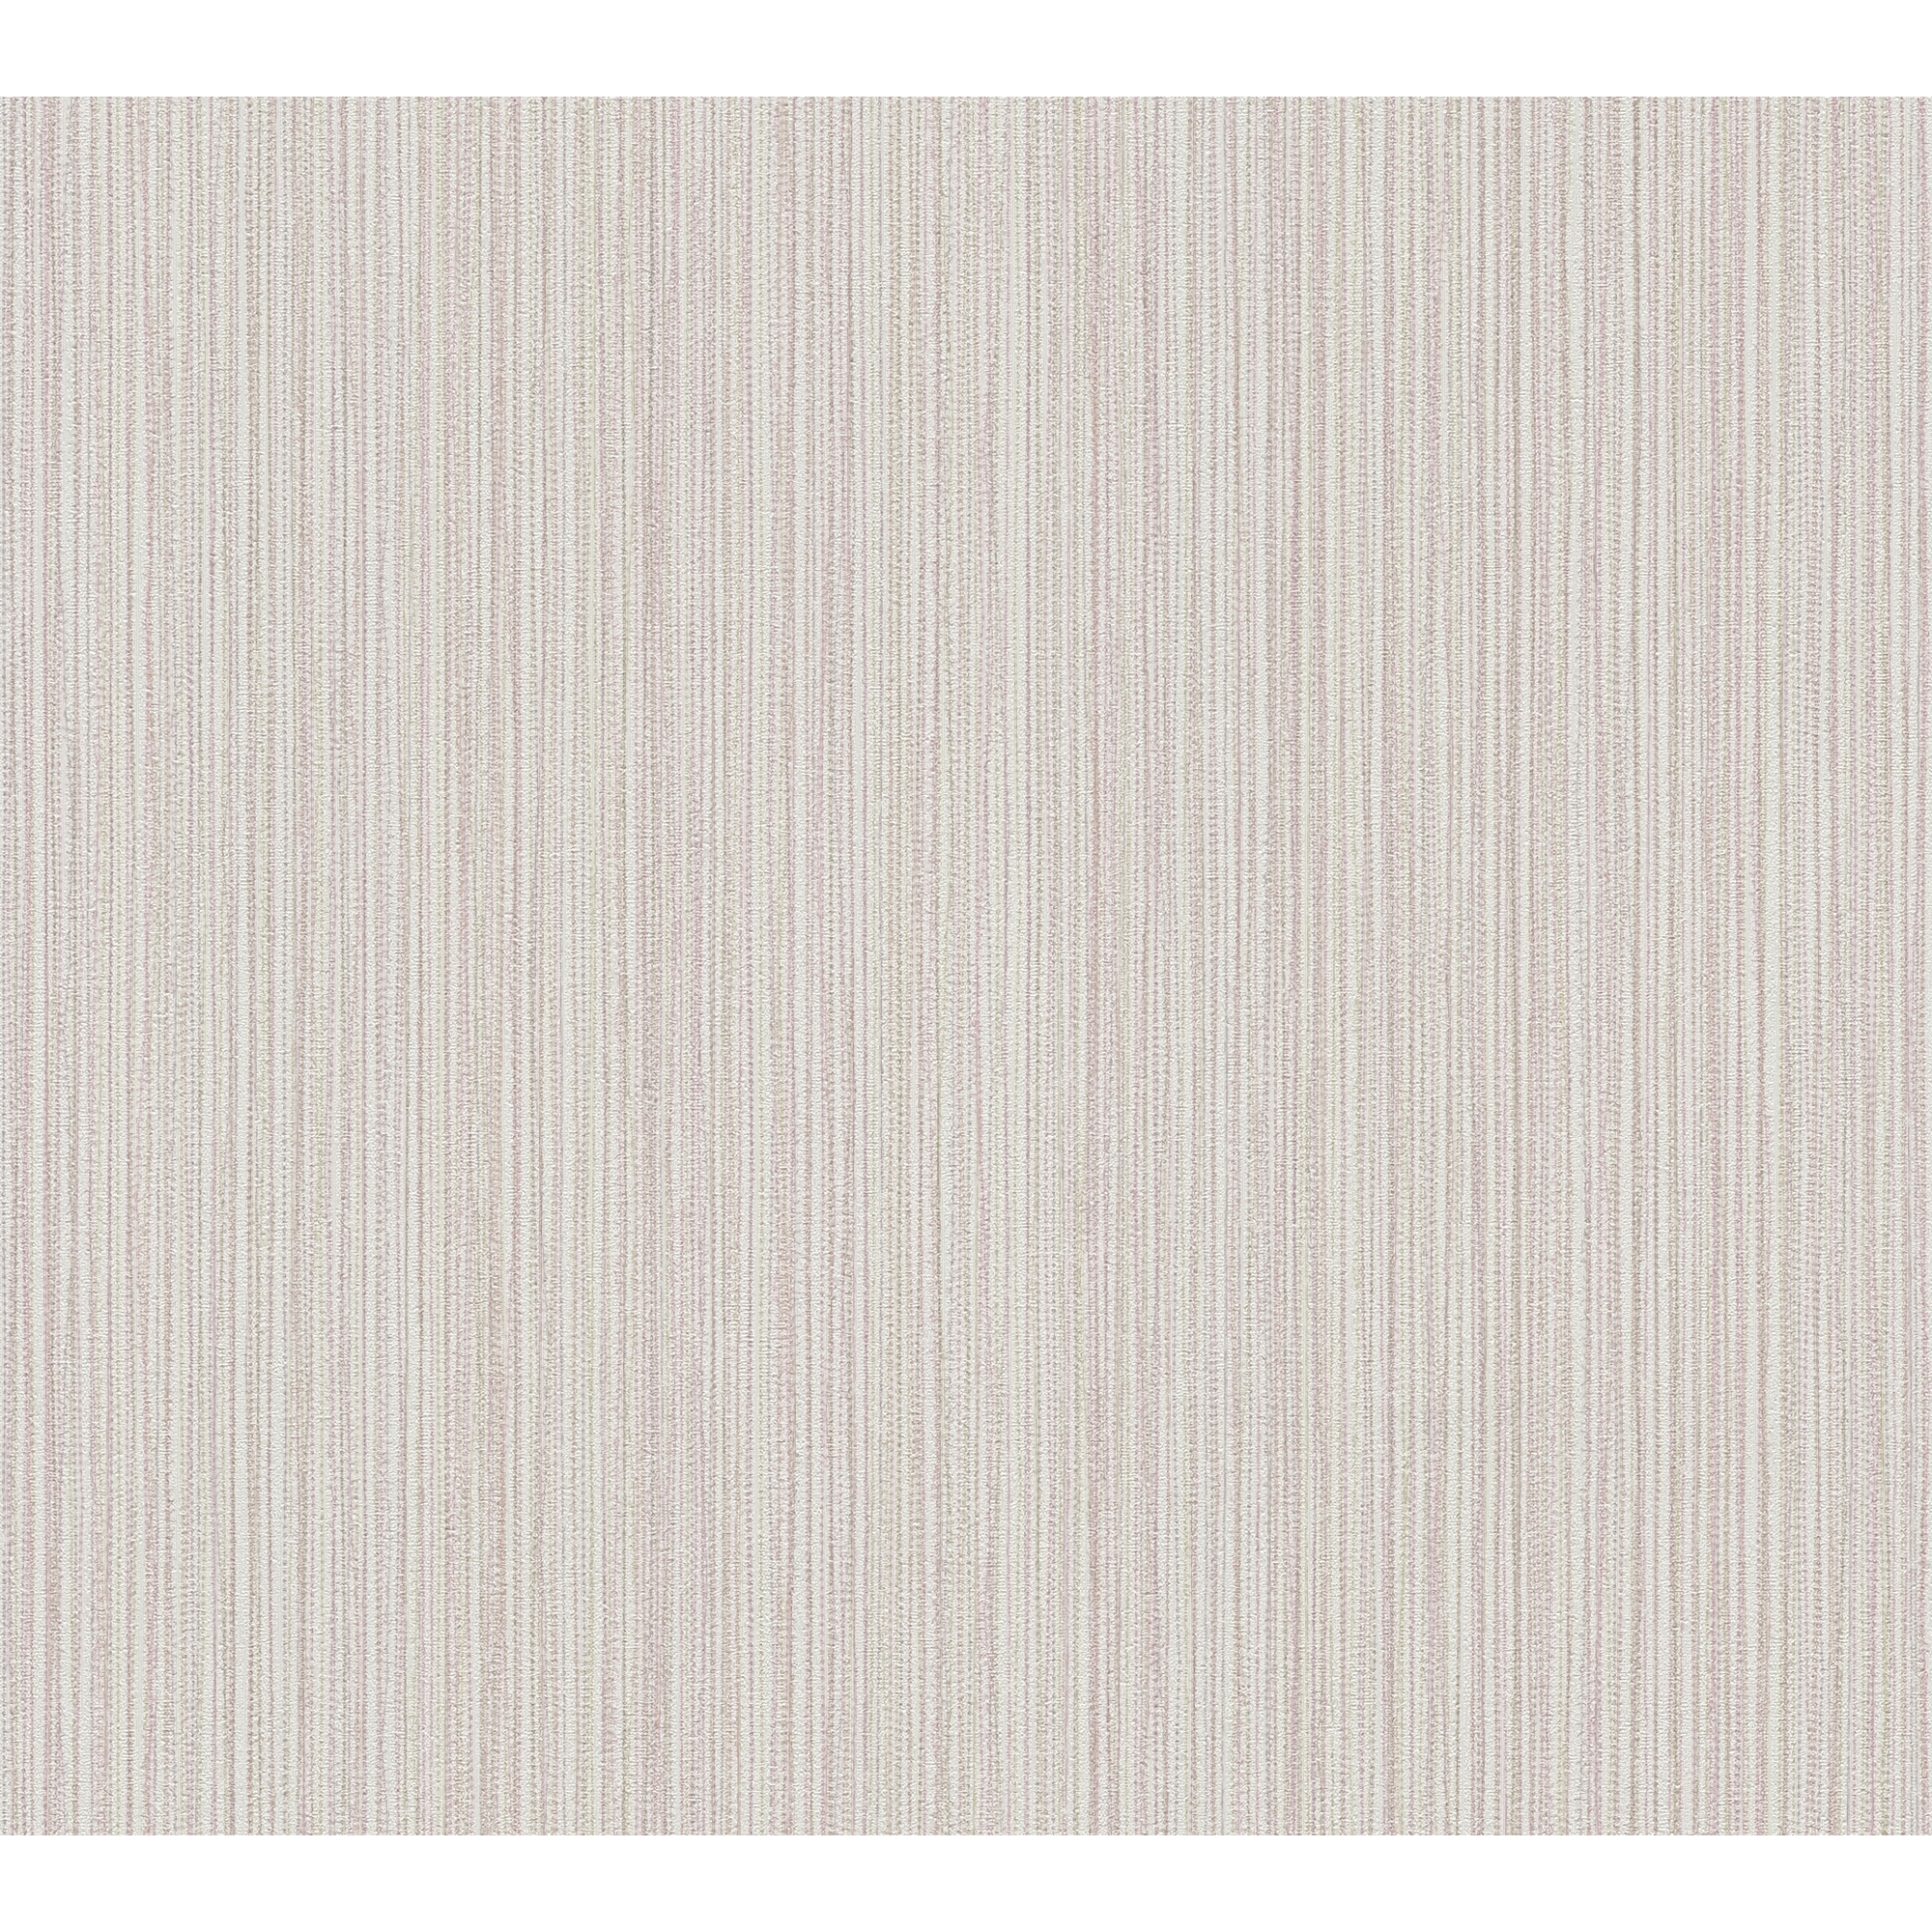 Vliestapete 'The BoS' Streifen rose/beige 10,05 x 0,53 m + product picture